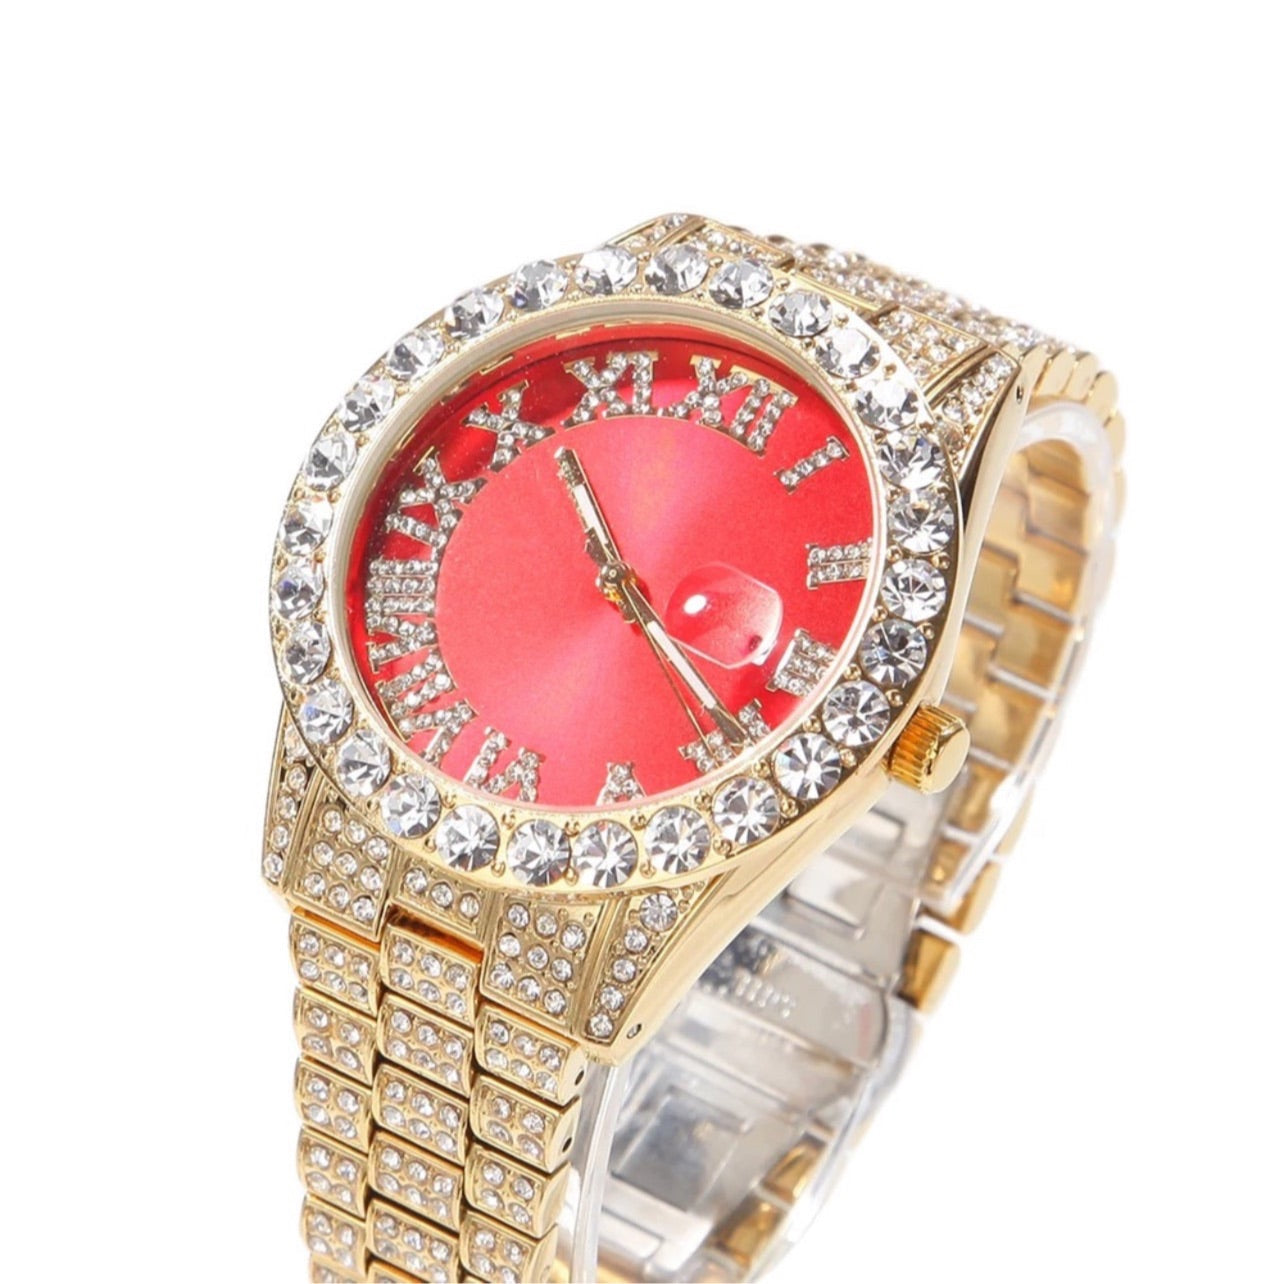 Exotic Watch “Gold”